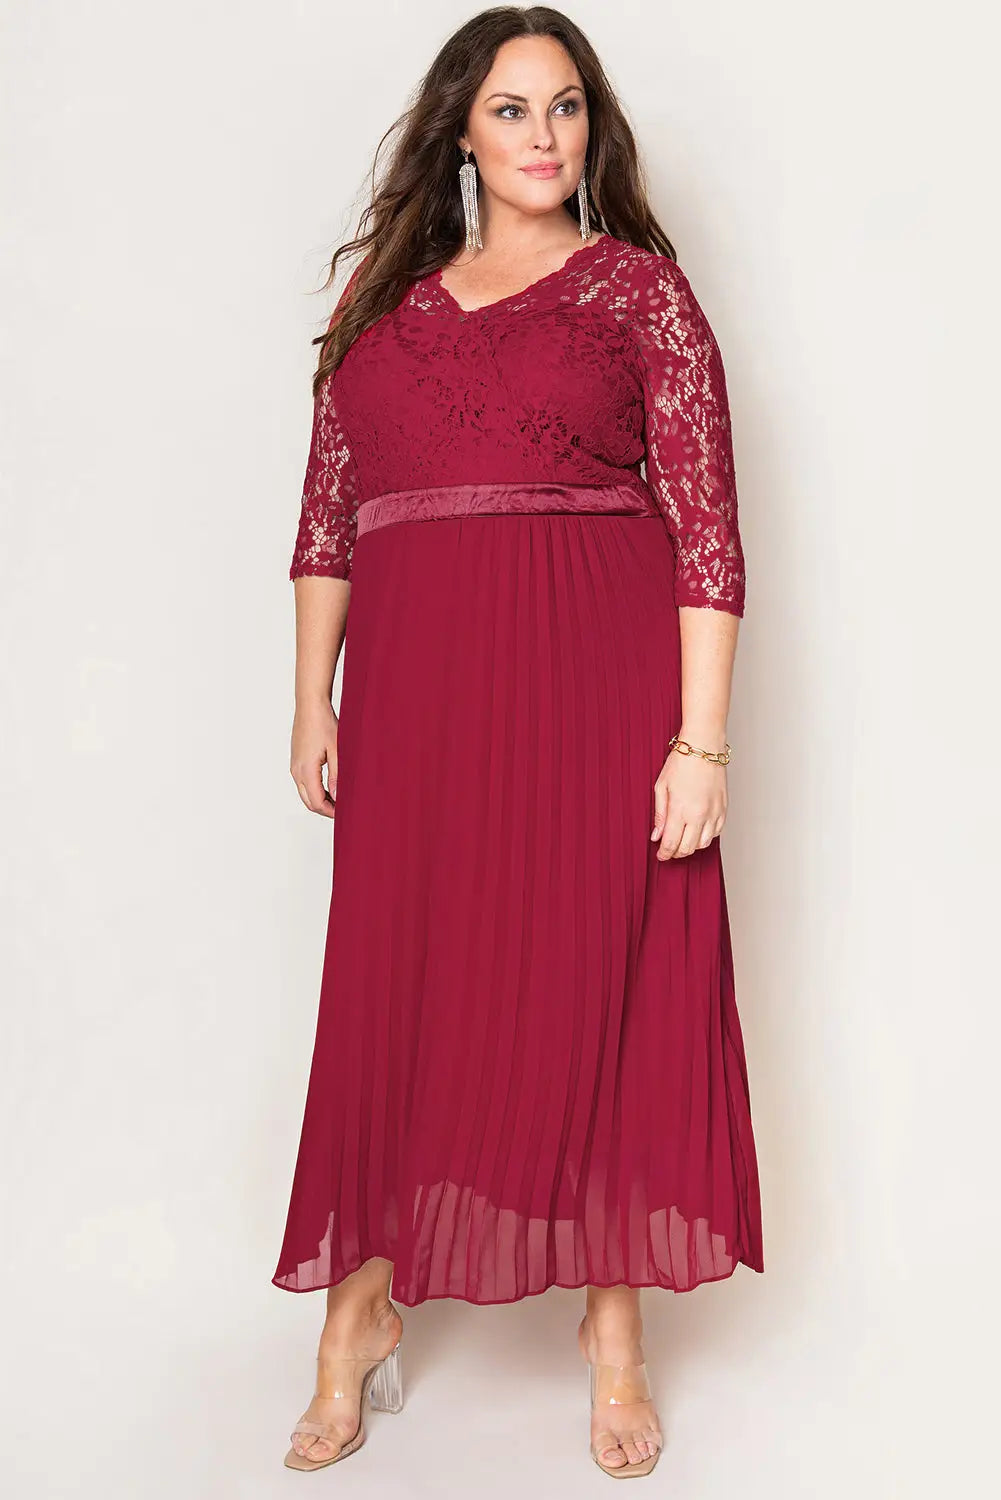 Red lace scalloped v neck 3/4 sleeves pleated tulle plus maxi dress - size